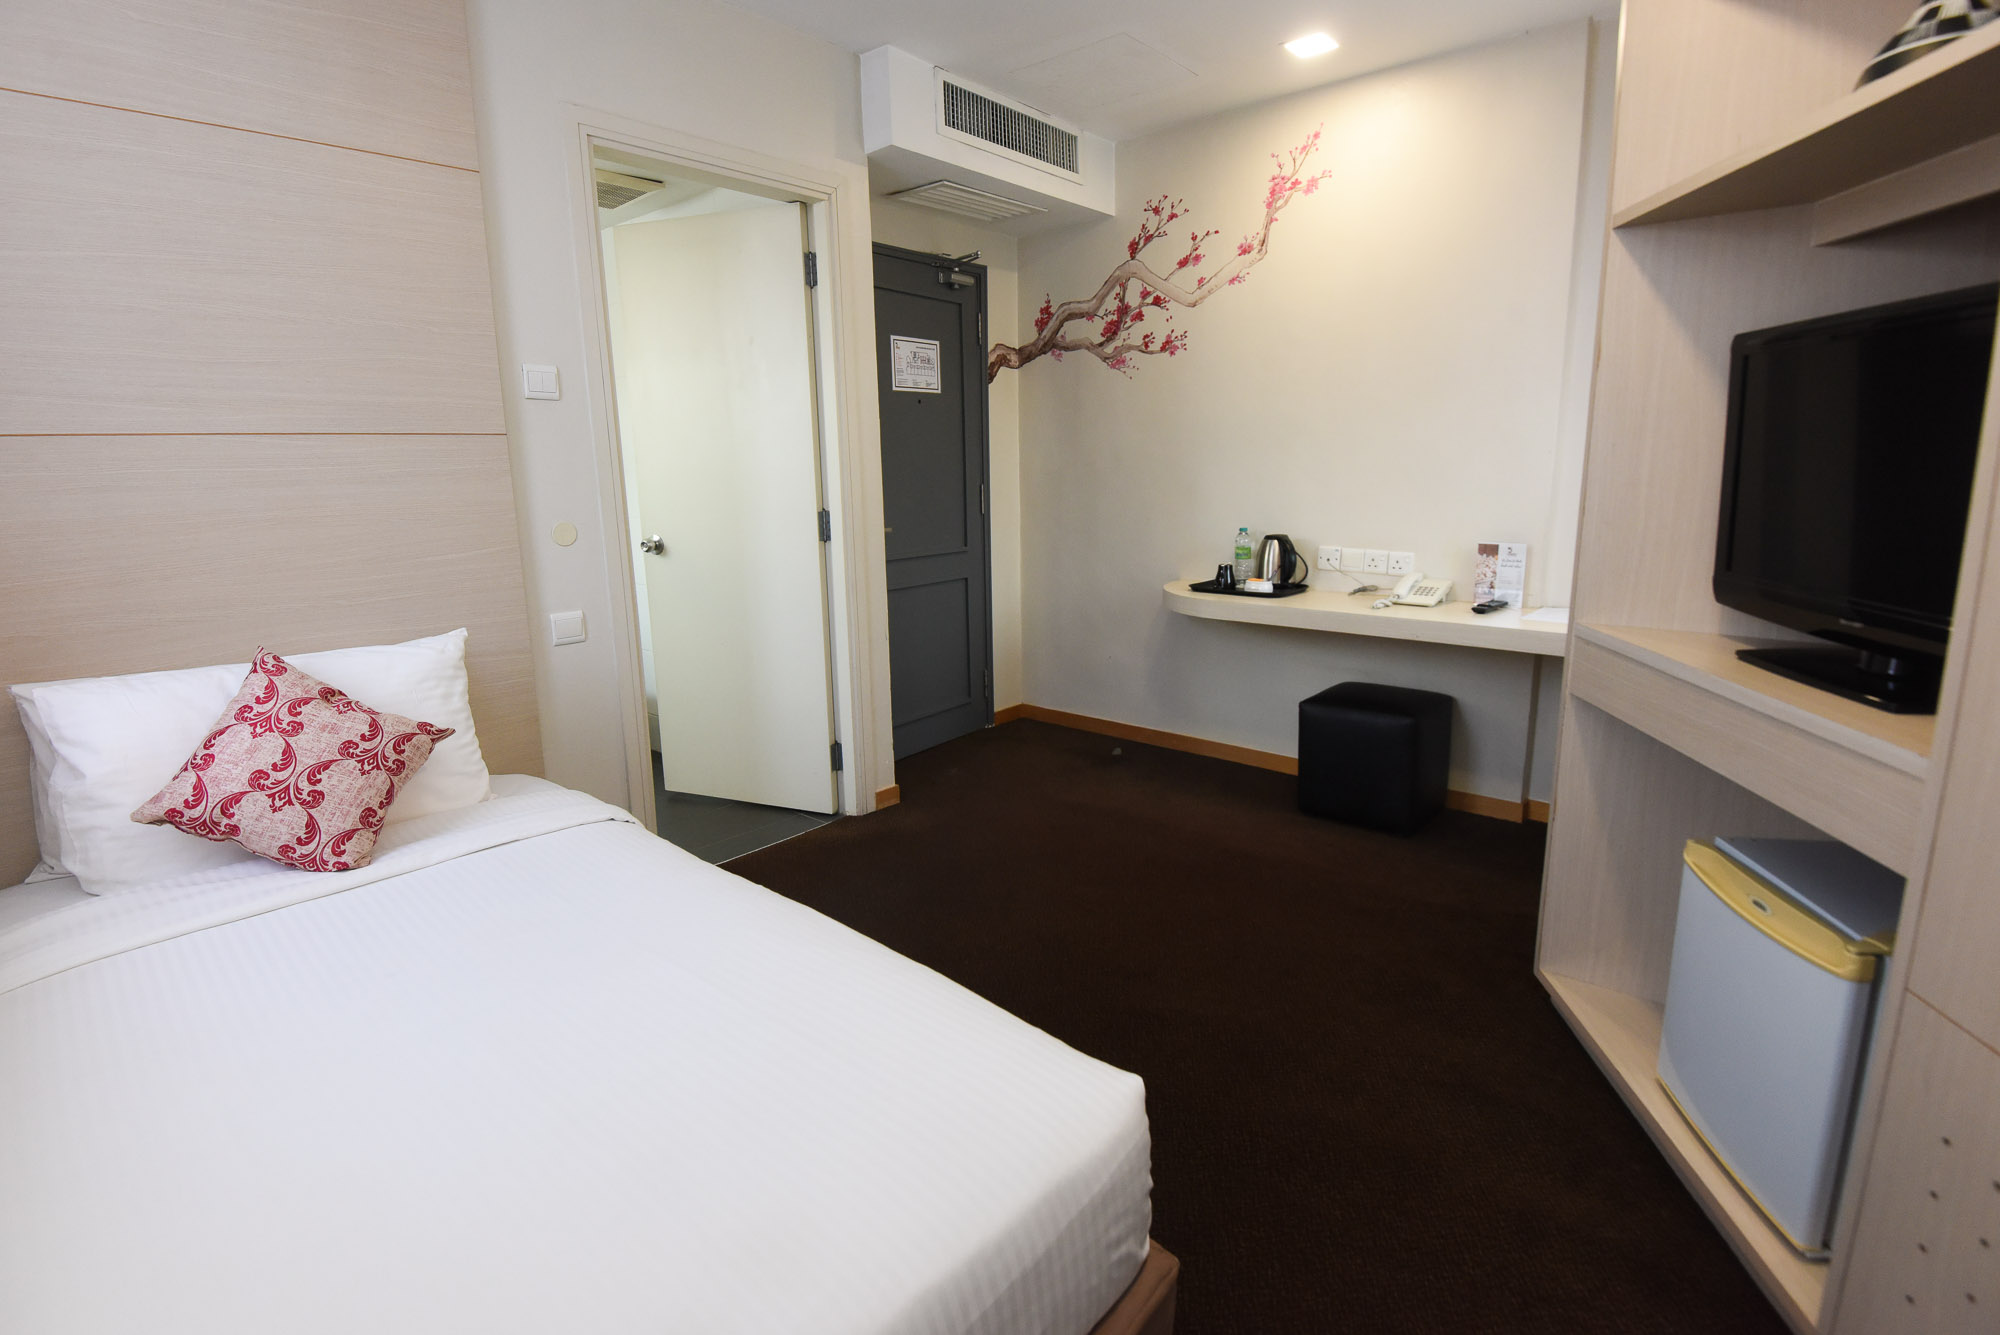 Perfect for the single traveller looking for a relaxing rest after a long day. The Standard Single room is equipped with the standard amenities such as air-conditioning, shower facilities, complimentary WiFi, in-room safe and much more to ensure a comfort stay.